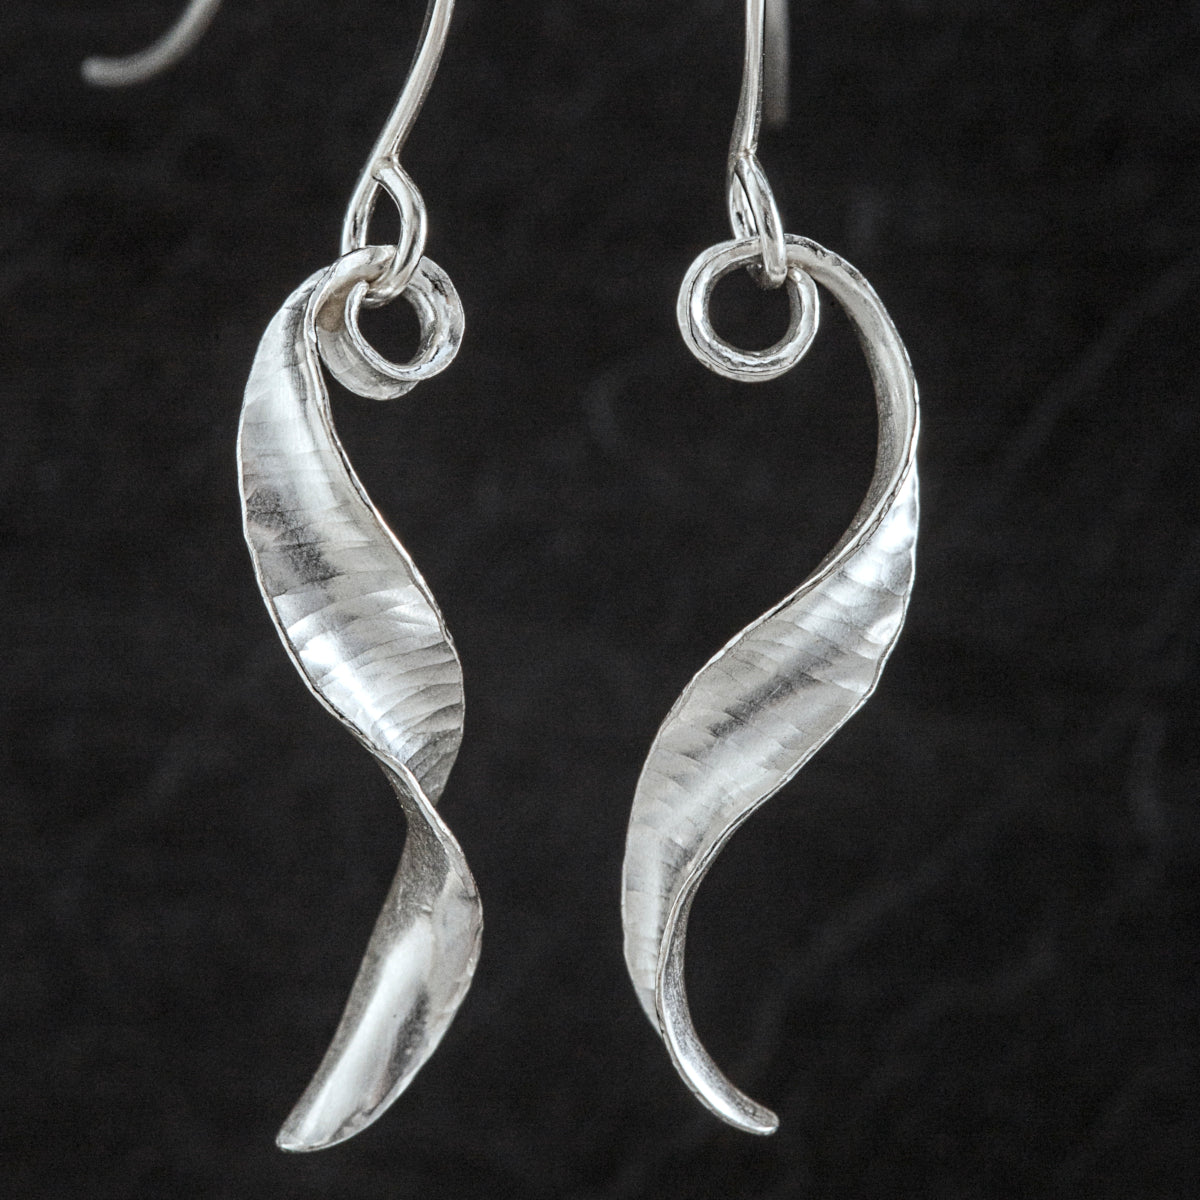 A pair of s-shaped earrings made from recycled sterling silver by the technique of anticlastic raising. The two earrings are mirror images of one another and have a curling, twisting shape. The right hand one is shown from the side and the other from the front.